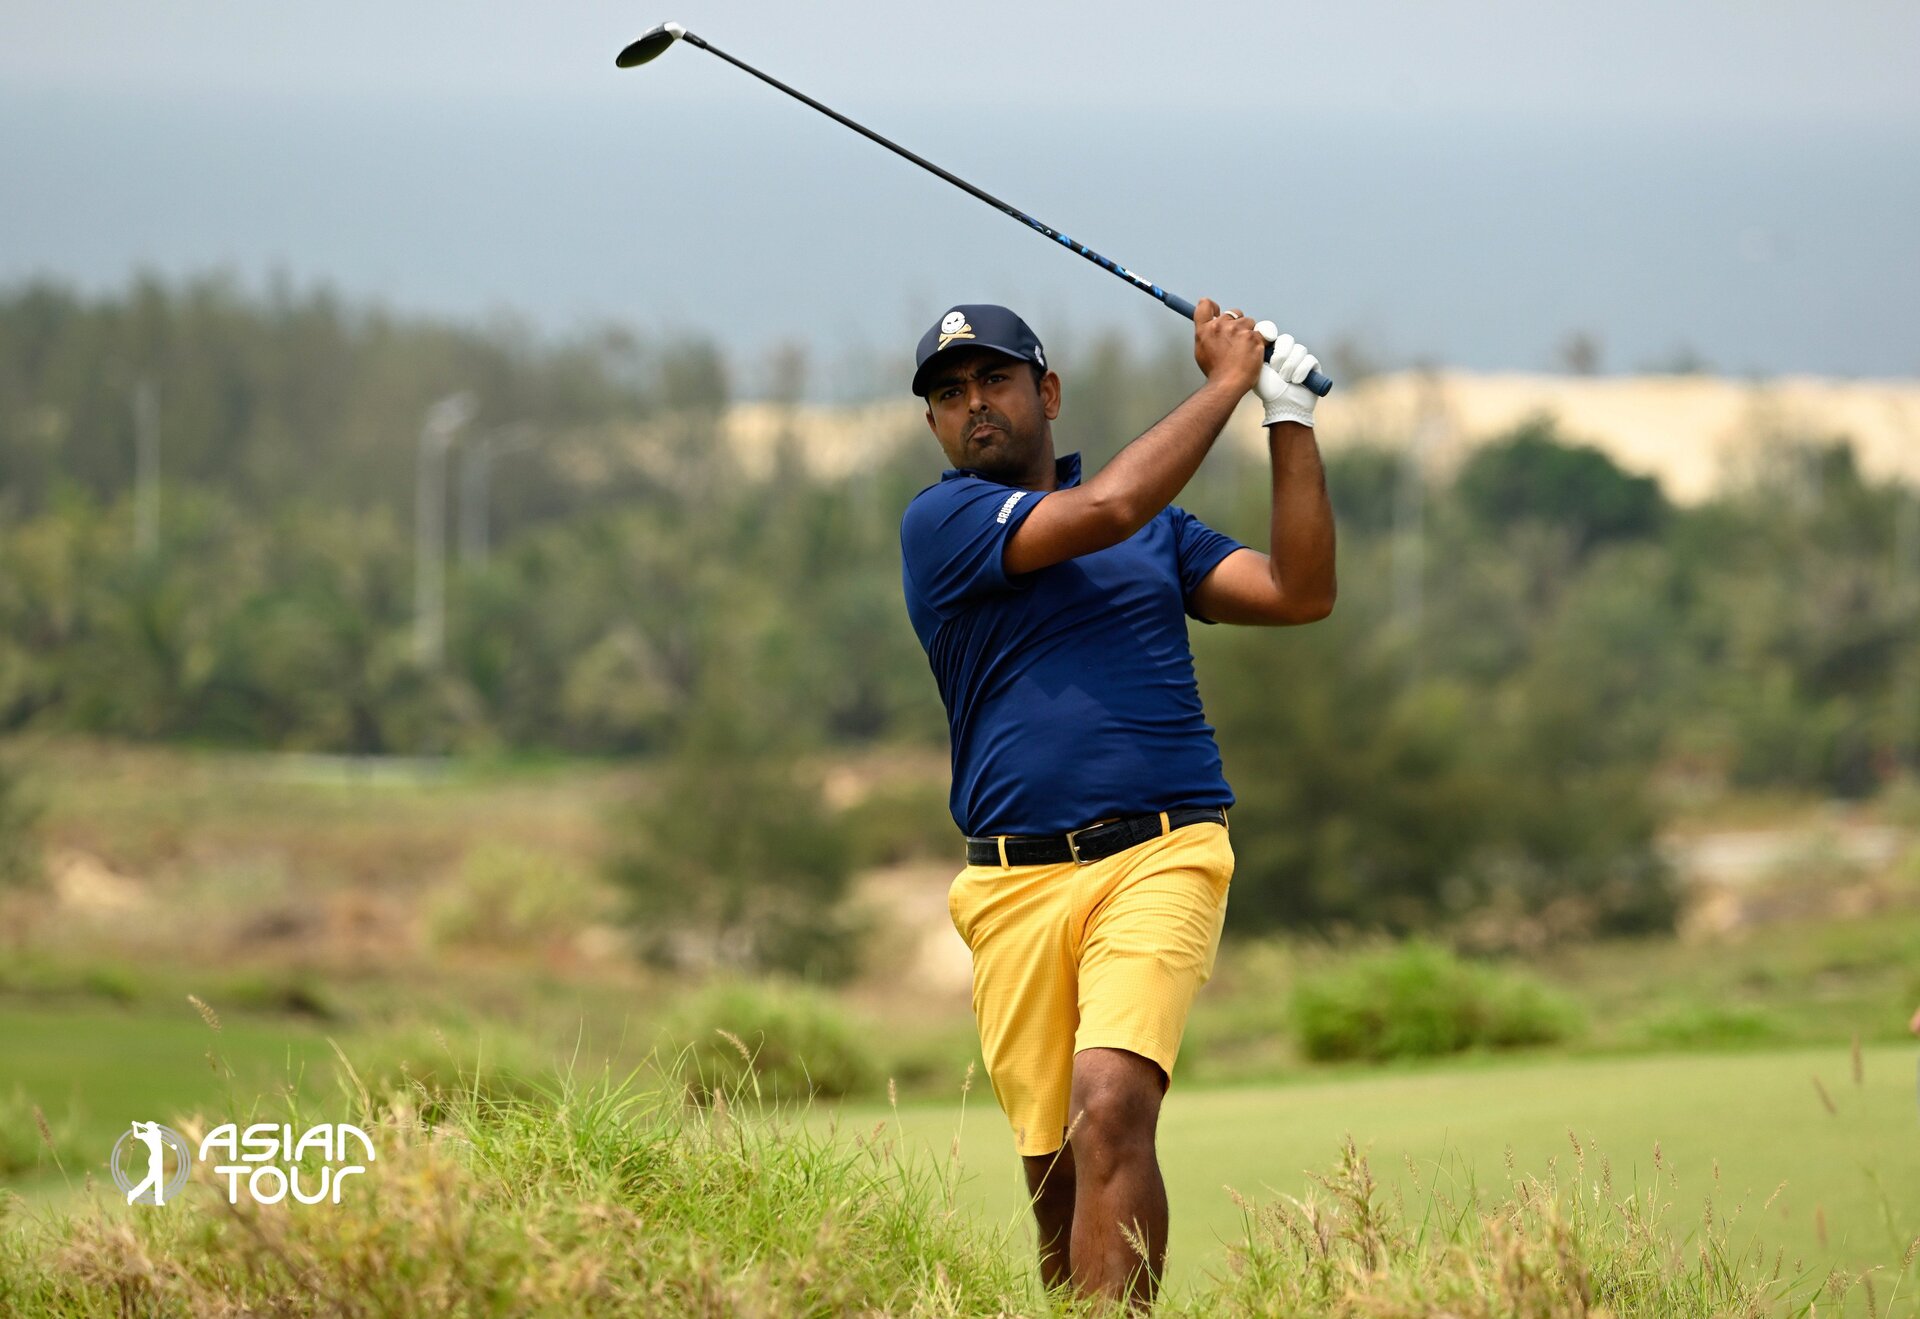 Anirban Lahiri: “The International Series is accelerating growth of golf in Asia”